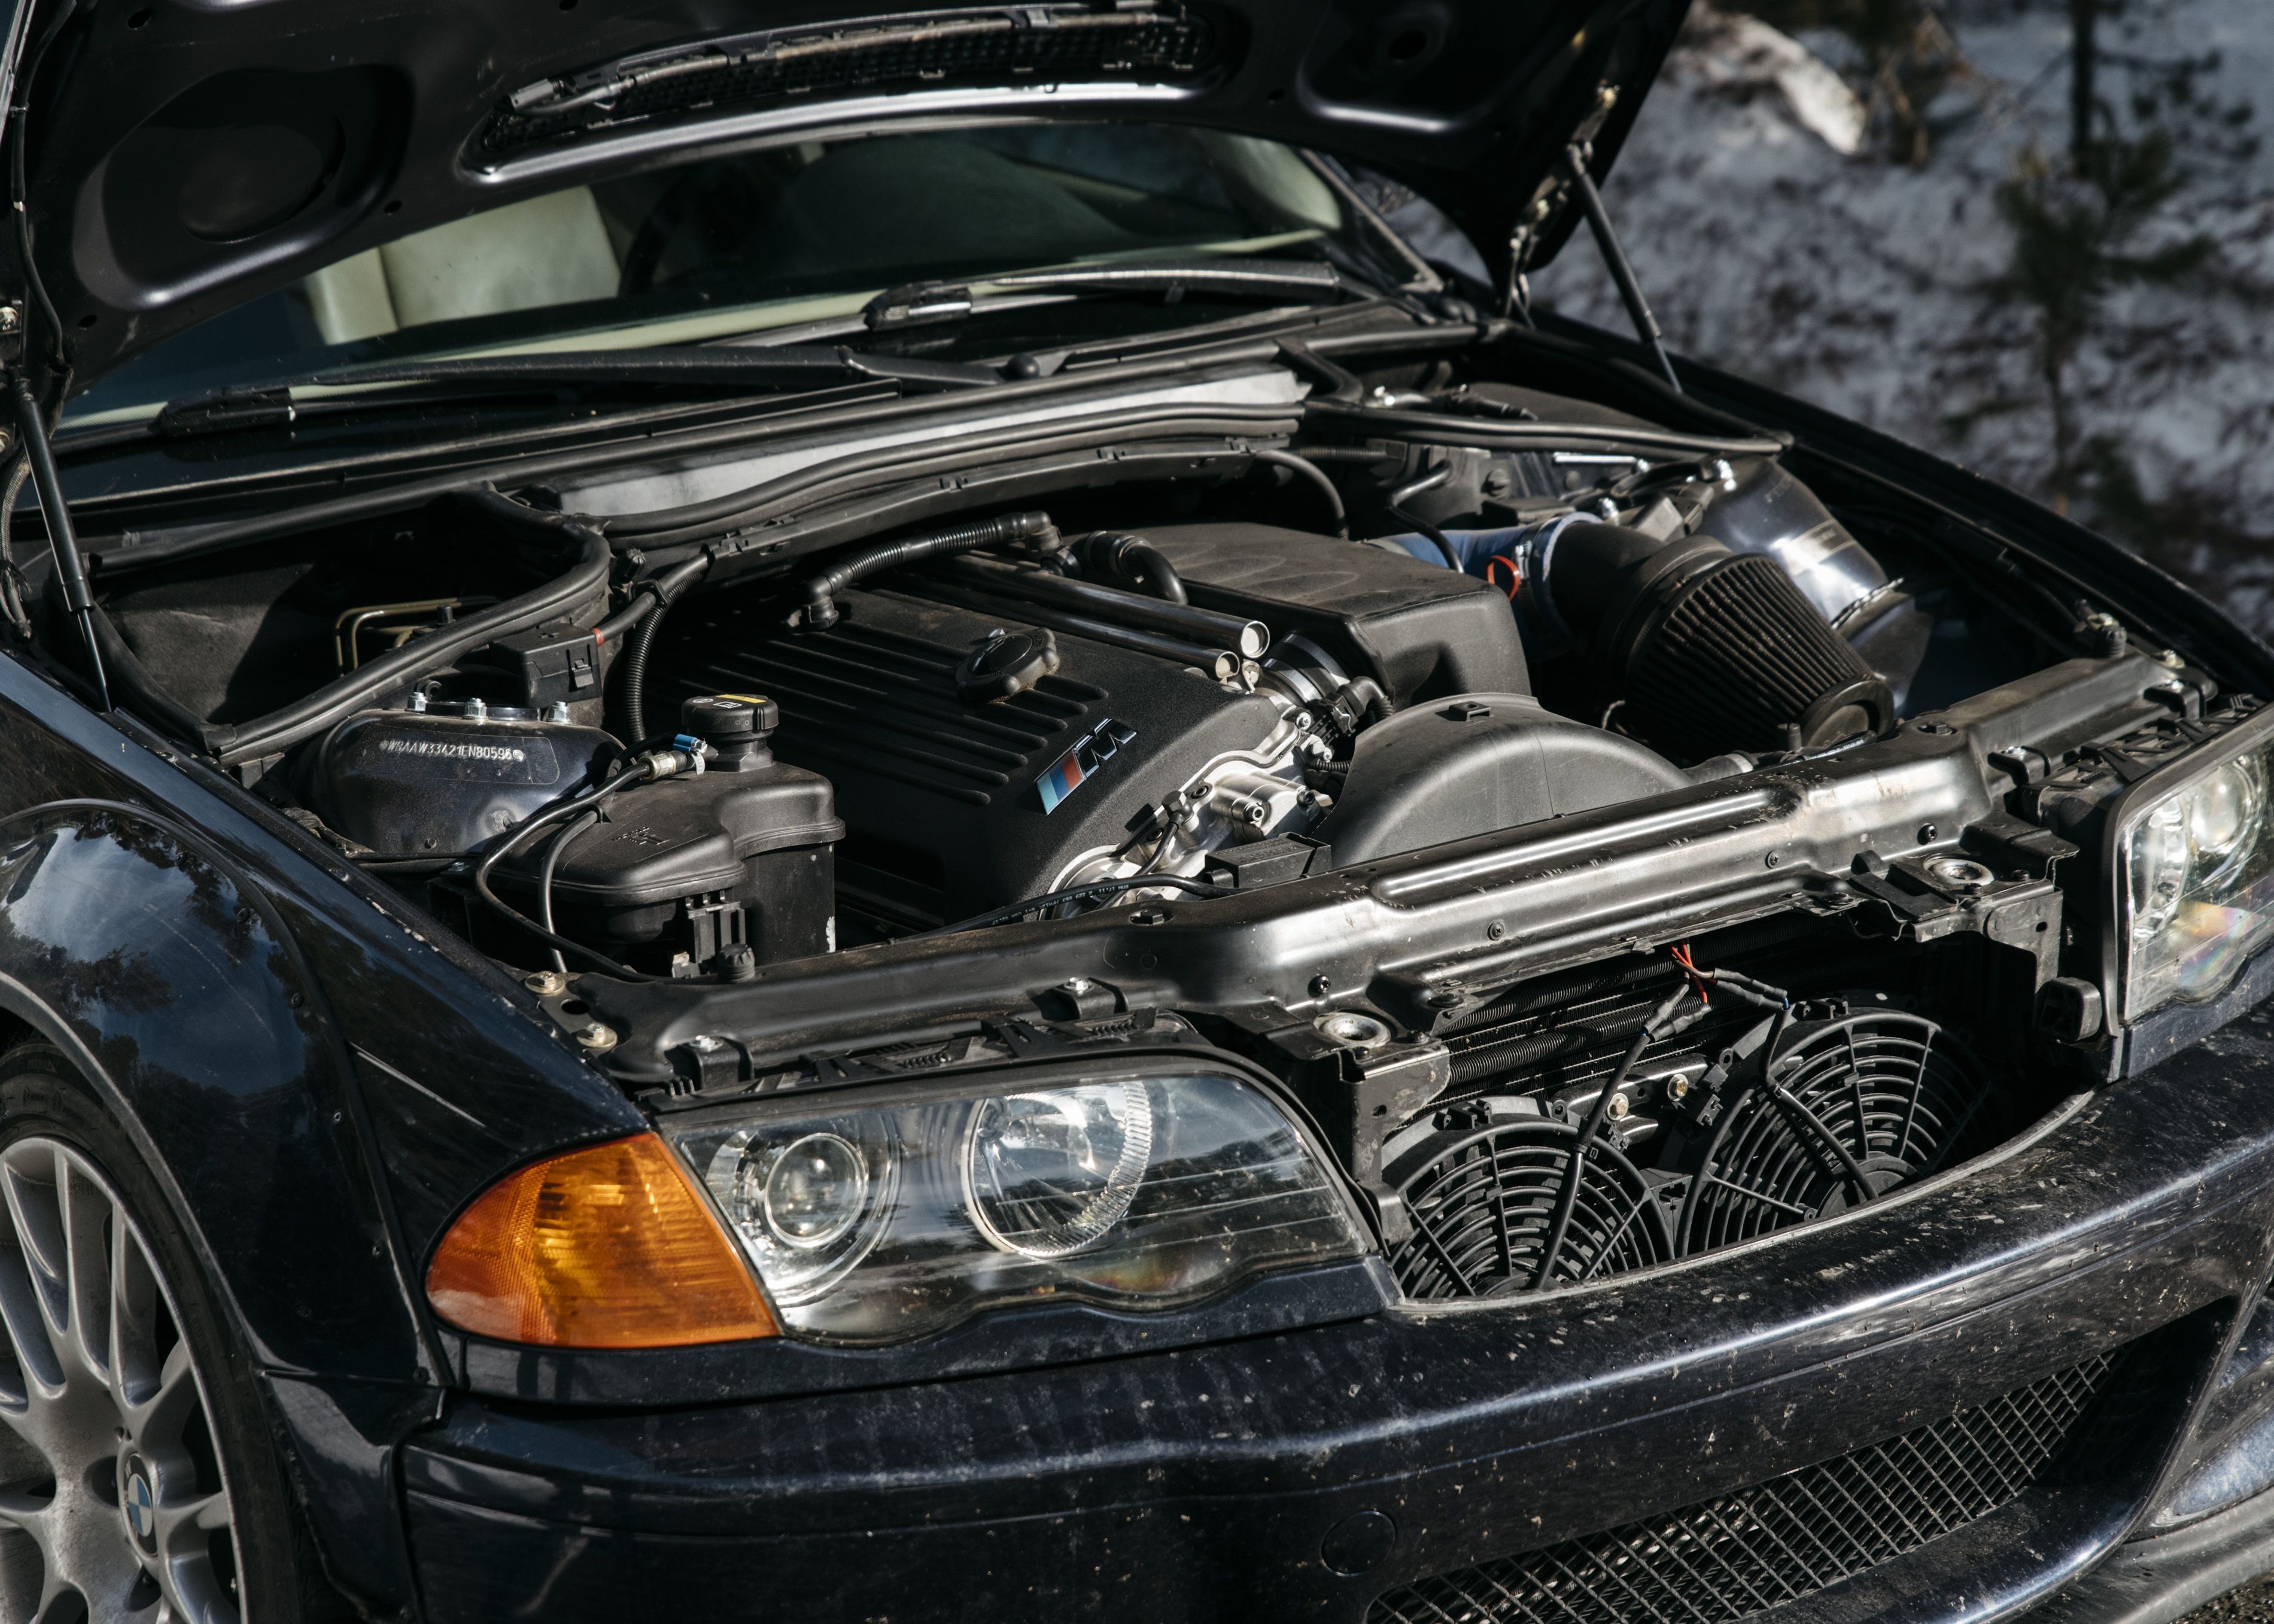 The One-Off BMW E46 M3 Touring